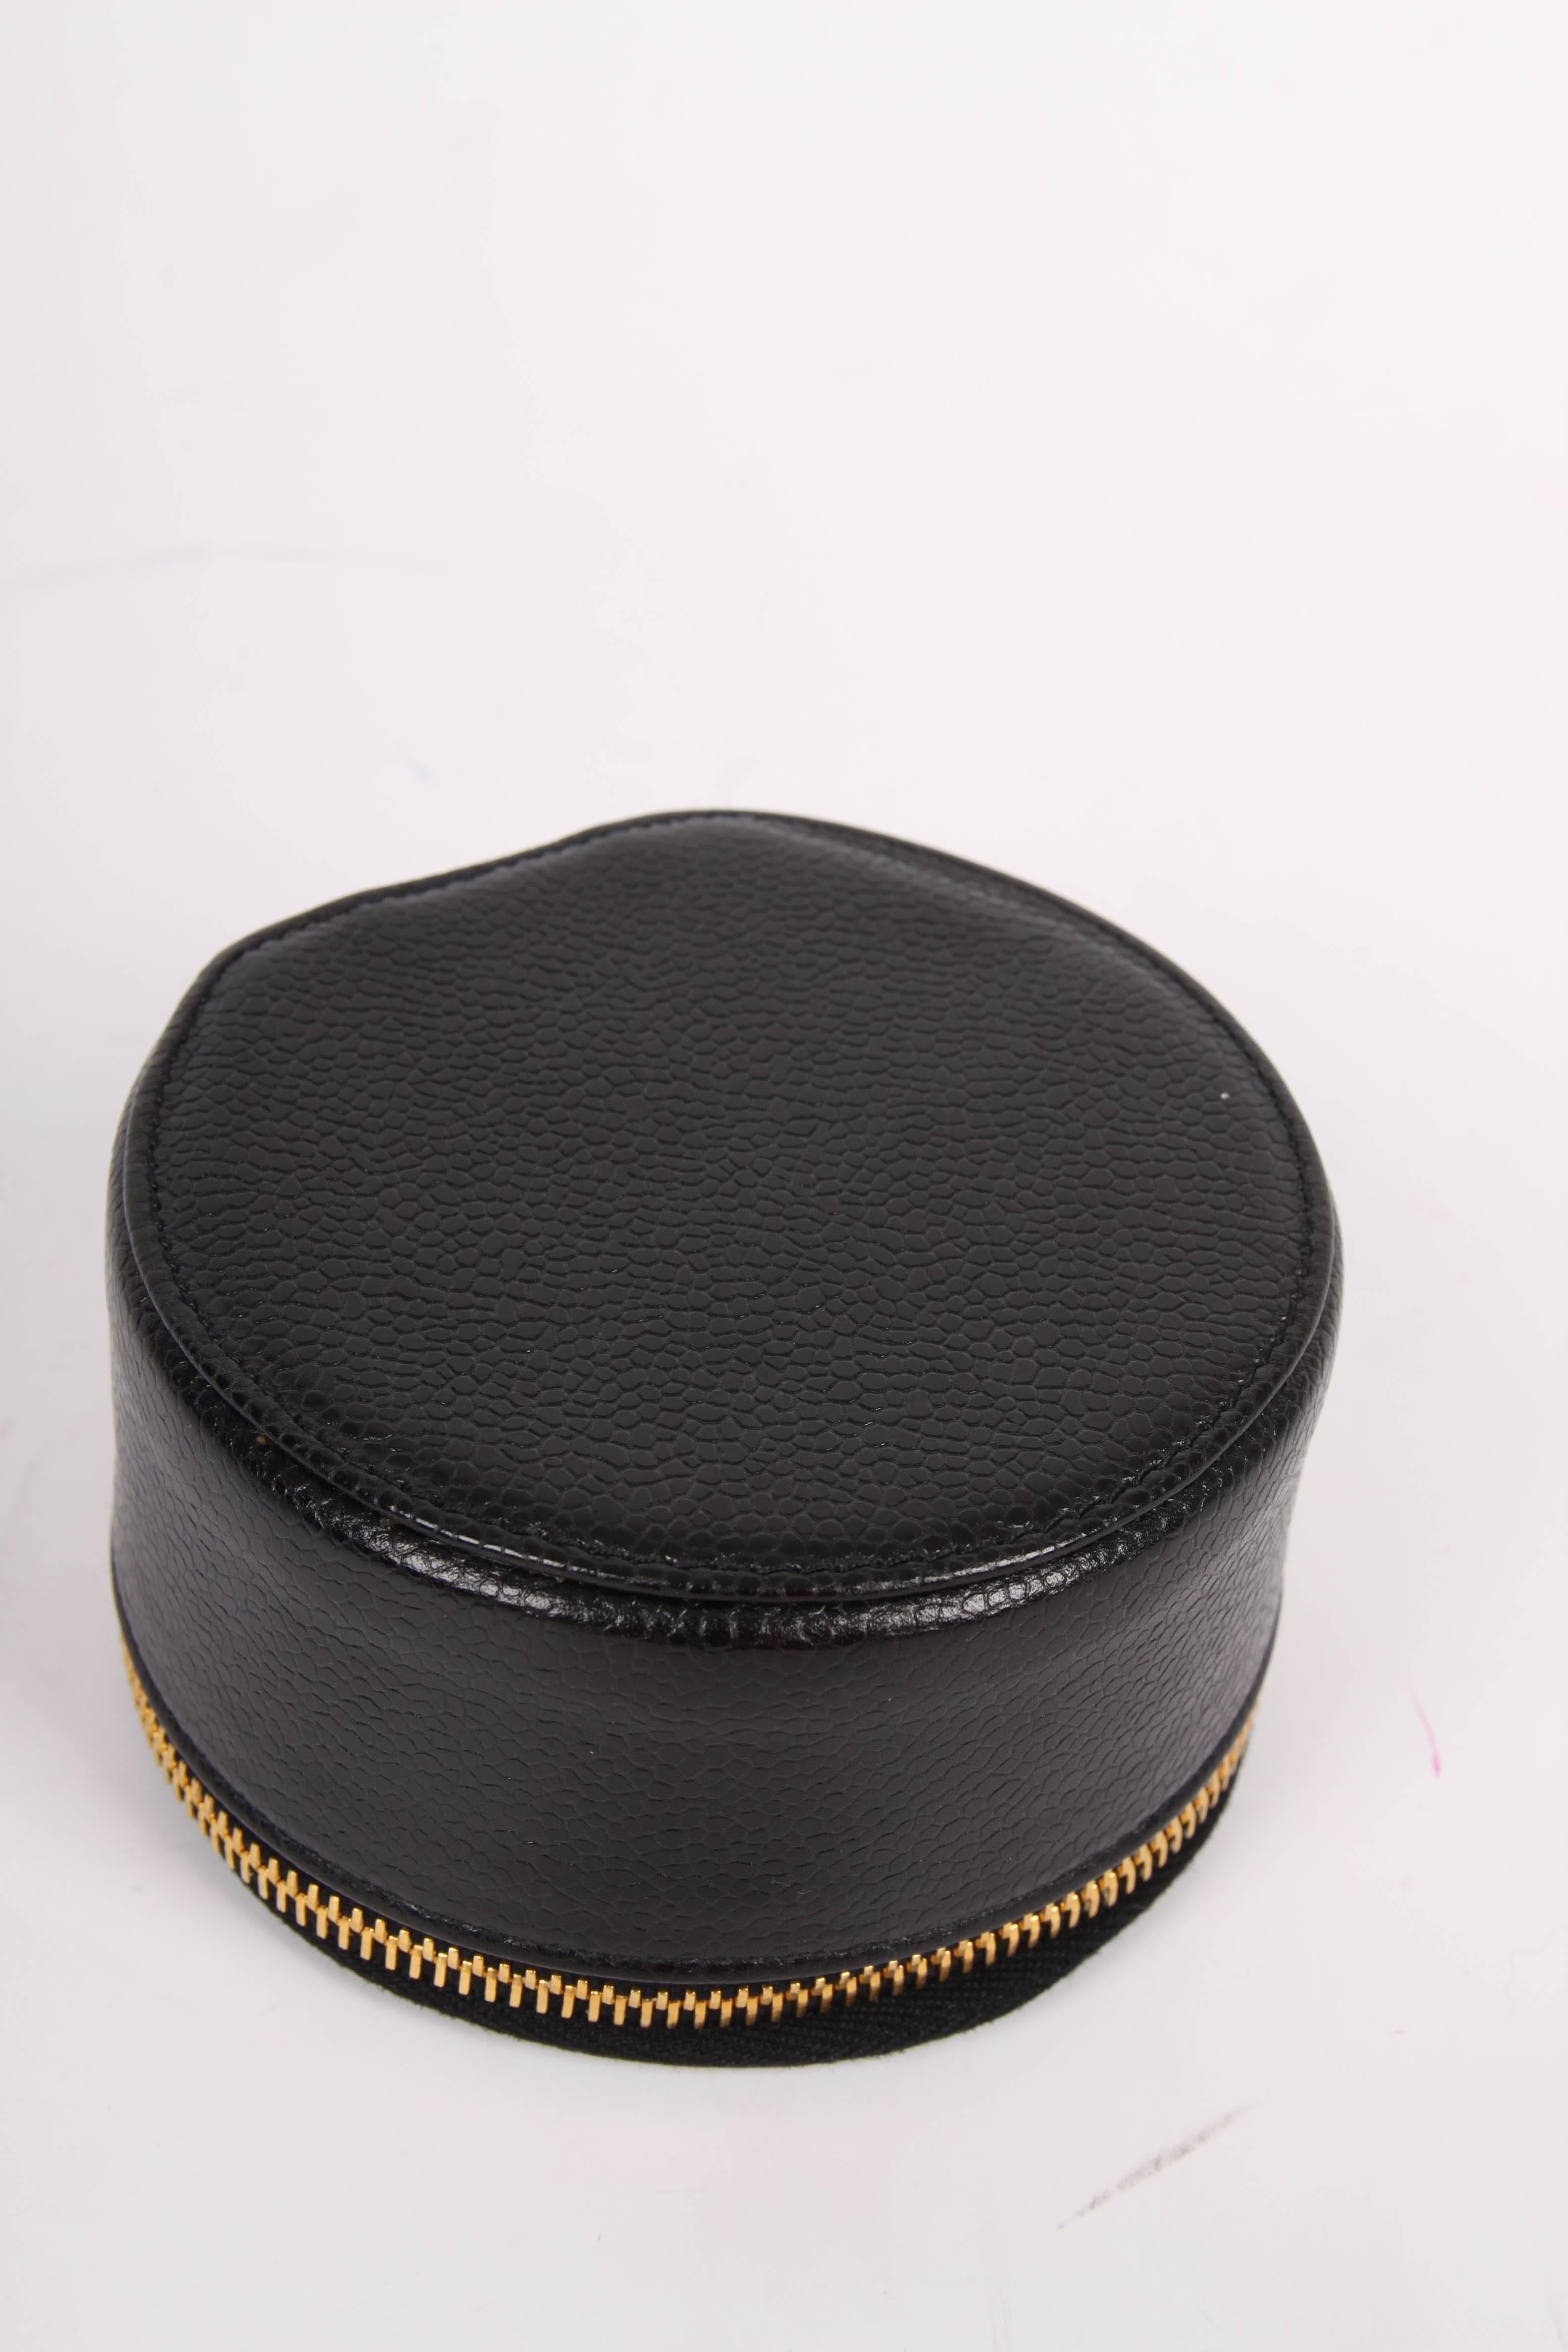 A wonderful vintage jewelry box by Chanel crafted of black caviar leather.

On top a large embroidered CC logo, gold-tone zip closure with a CC dangle. Lining on the inside in black velvet; a lit and a velvet strap to create different compartments